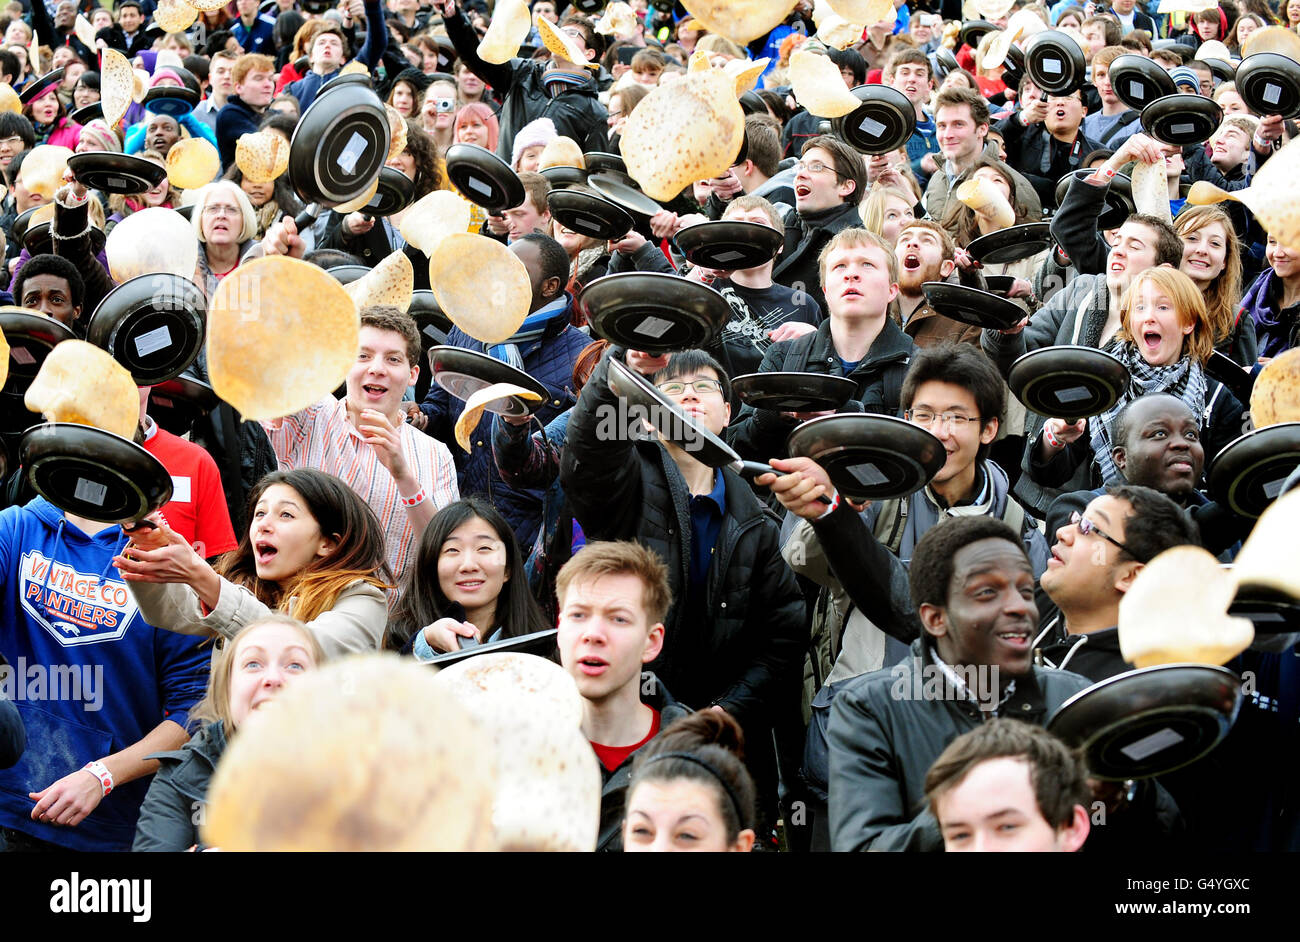 Staff and students at the University of Sheffield take part in The Big Flip and break the Guinness World Record for the most people flipping pancakes at The Endcliffe Village, Sheffield. Stock Photo